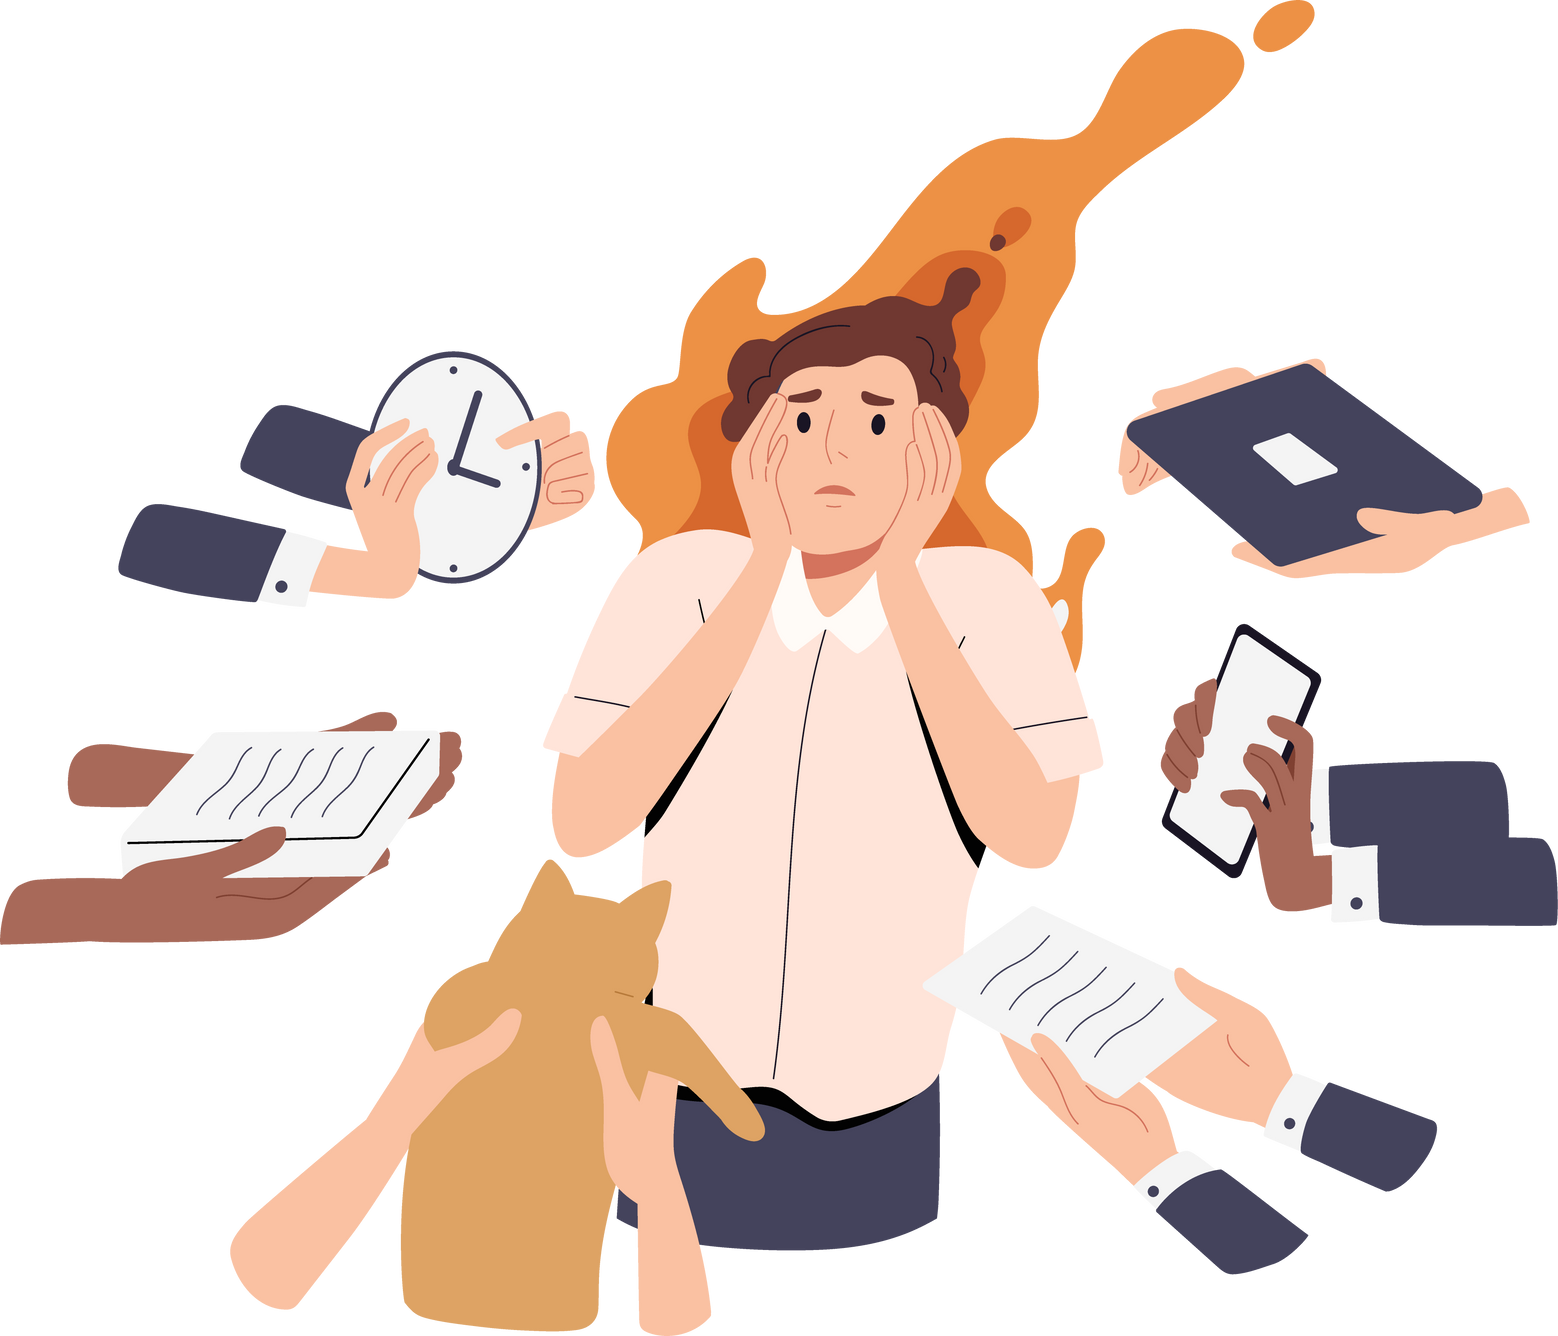 Man surrounded by daily tasks, displaying distress. It represents the symptoms of chronic stress or burnout.